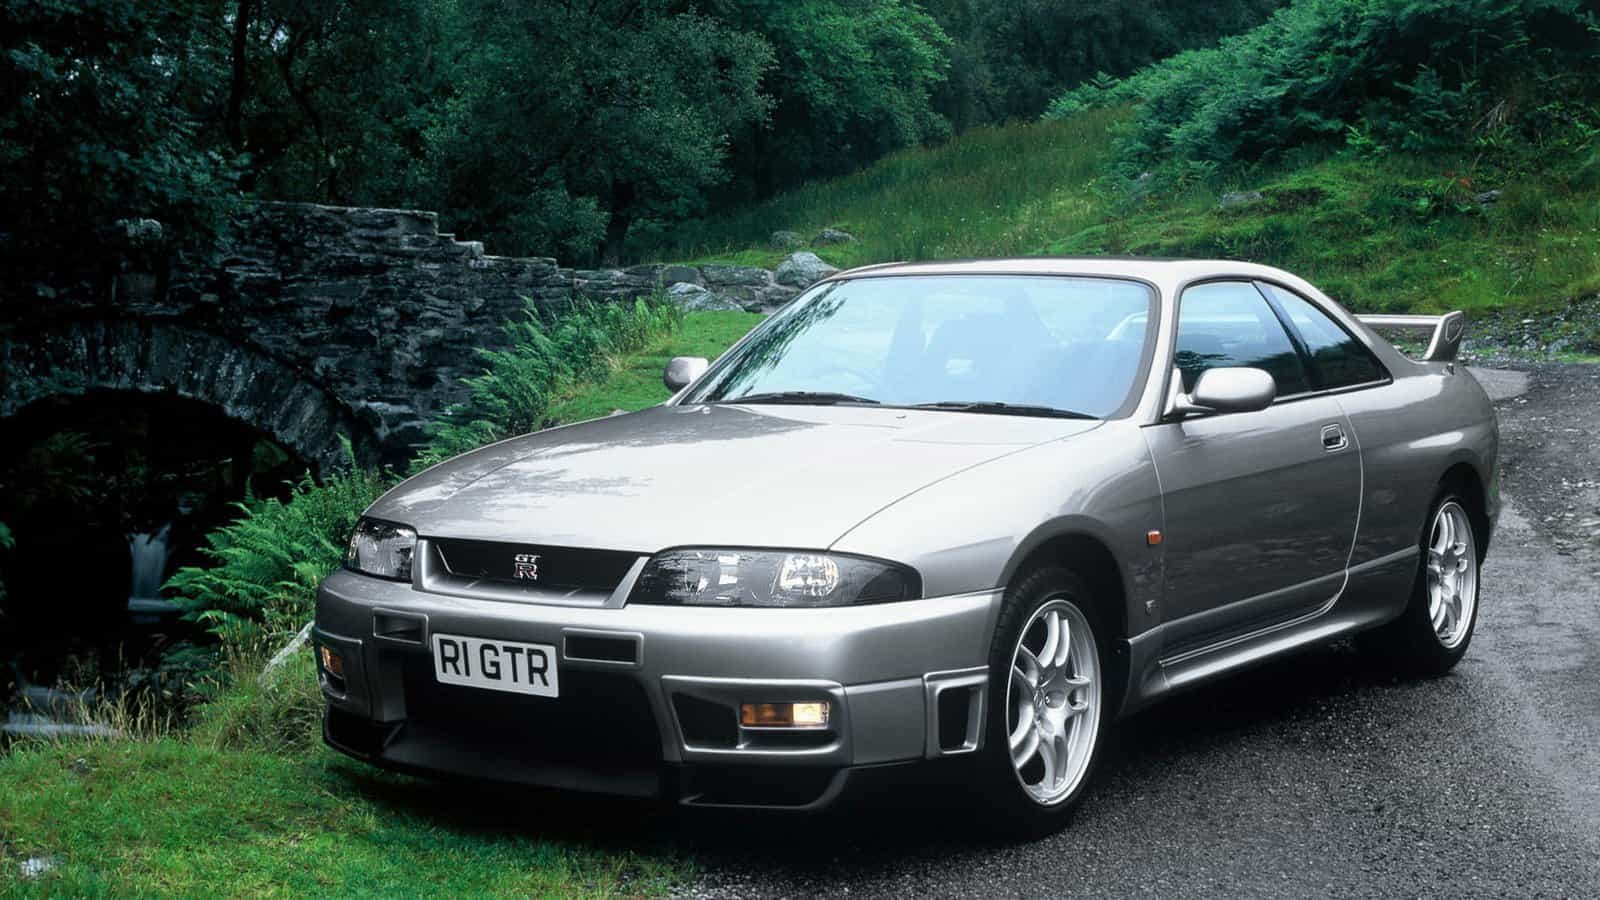 Godzilla's biography: The 50-plus year history of the Nissan GT-R